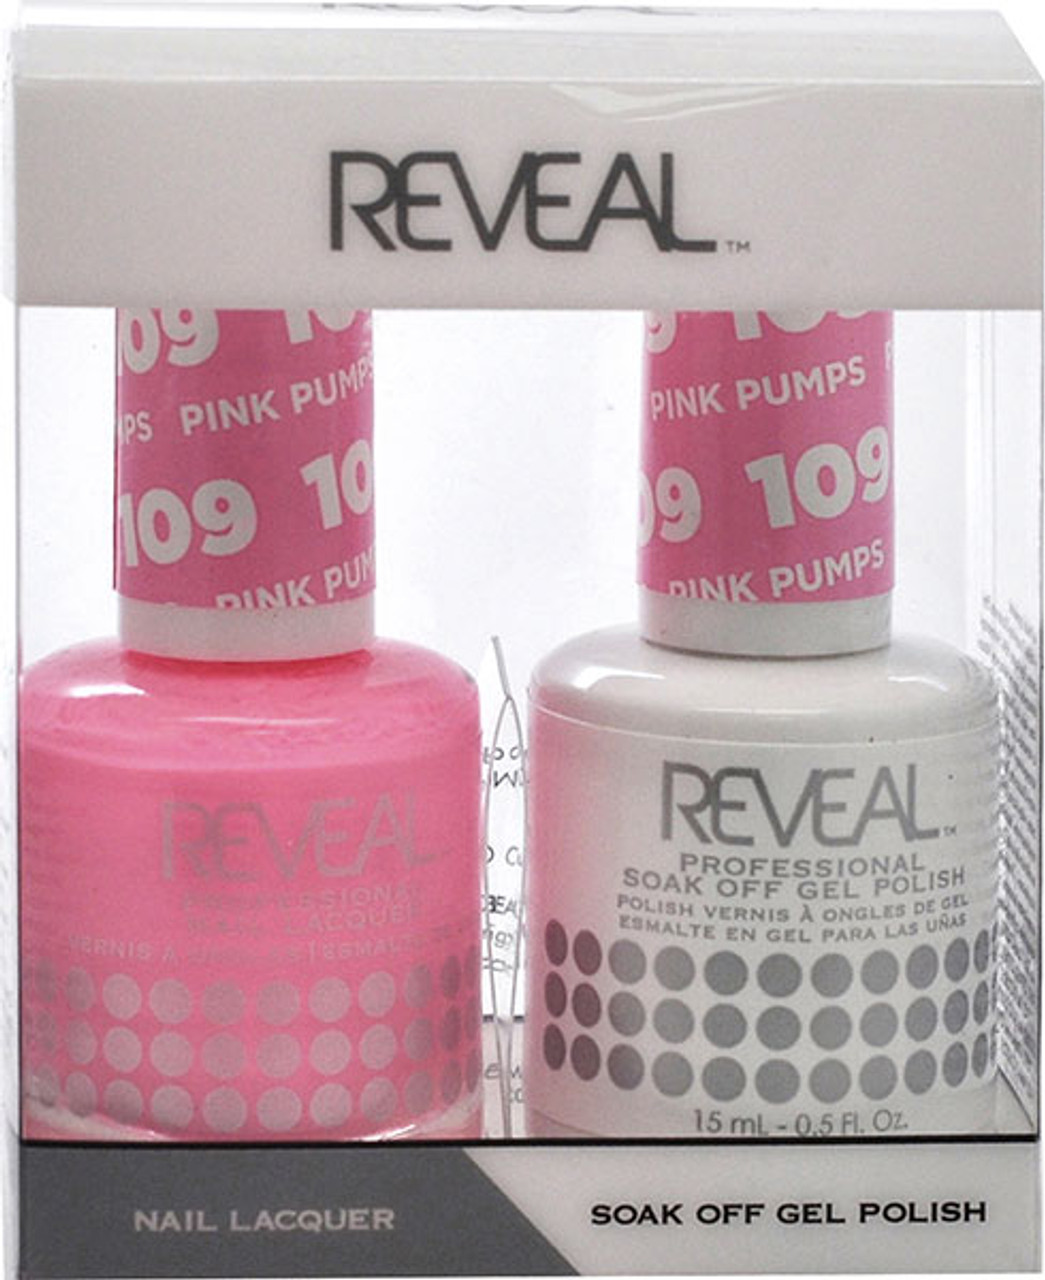 Reveal Gel Polish & Nail Lacquer Matching Duo - PINK PUMPS - .5 oz